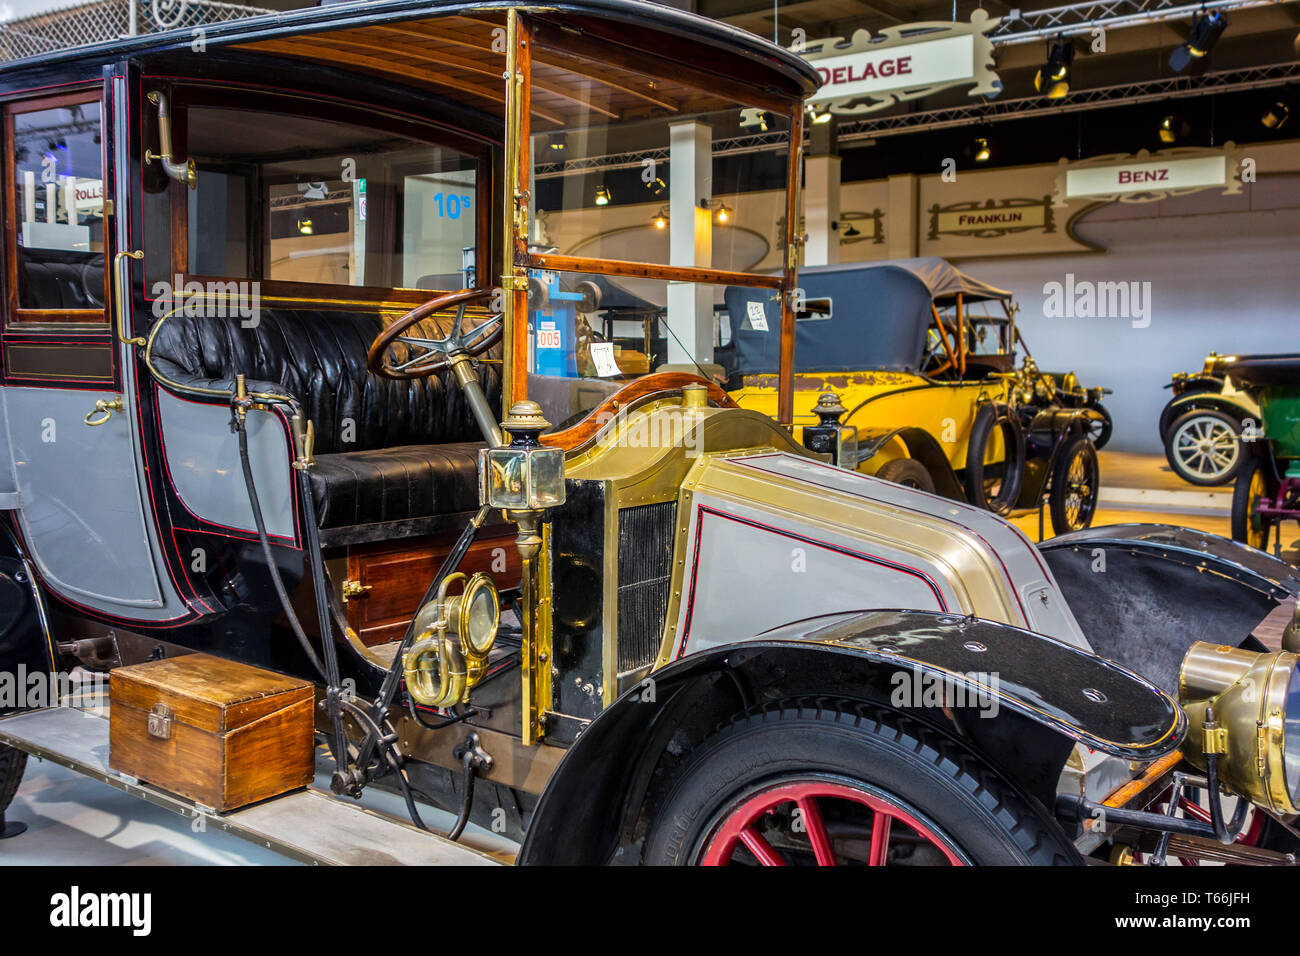 Renault Type X-1, French classic automobile / oldtimer / antique vehicle from 1908 at Autoworld, vintage car museum in Brussels, Belgium Stock Photo